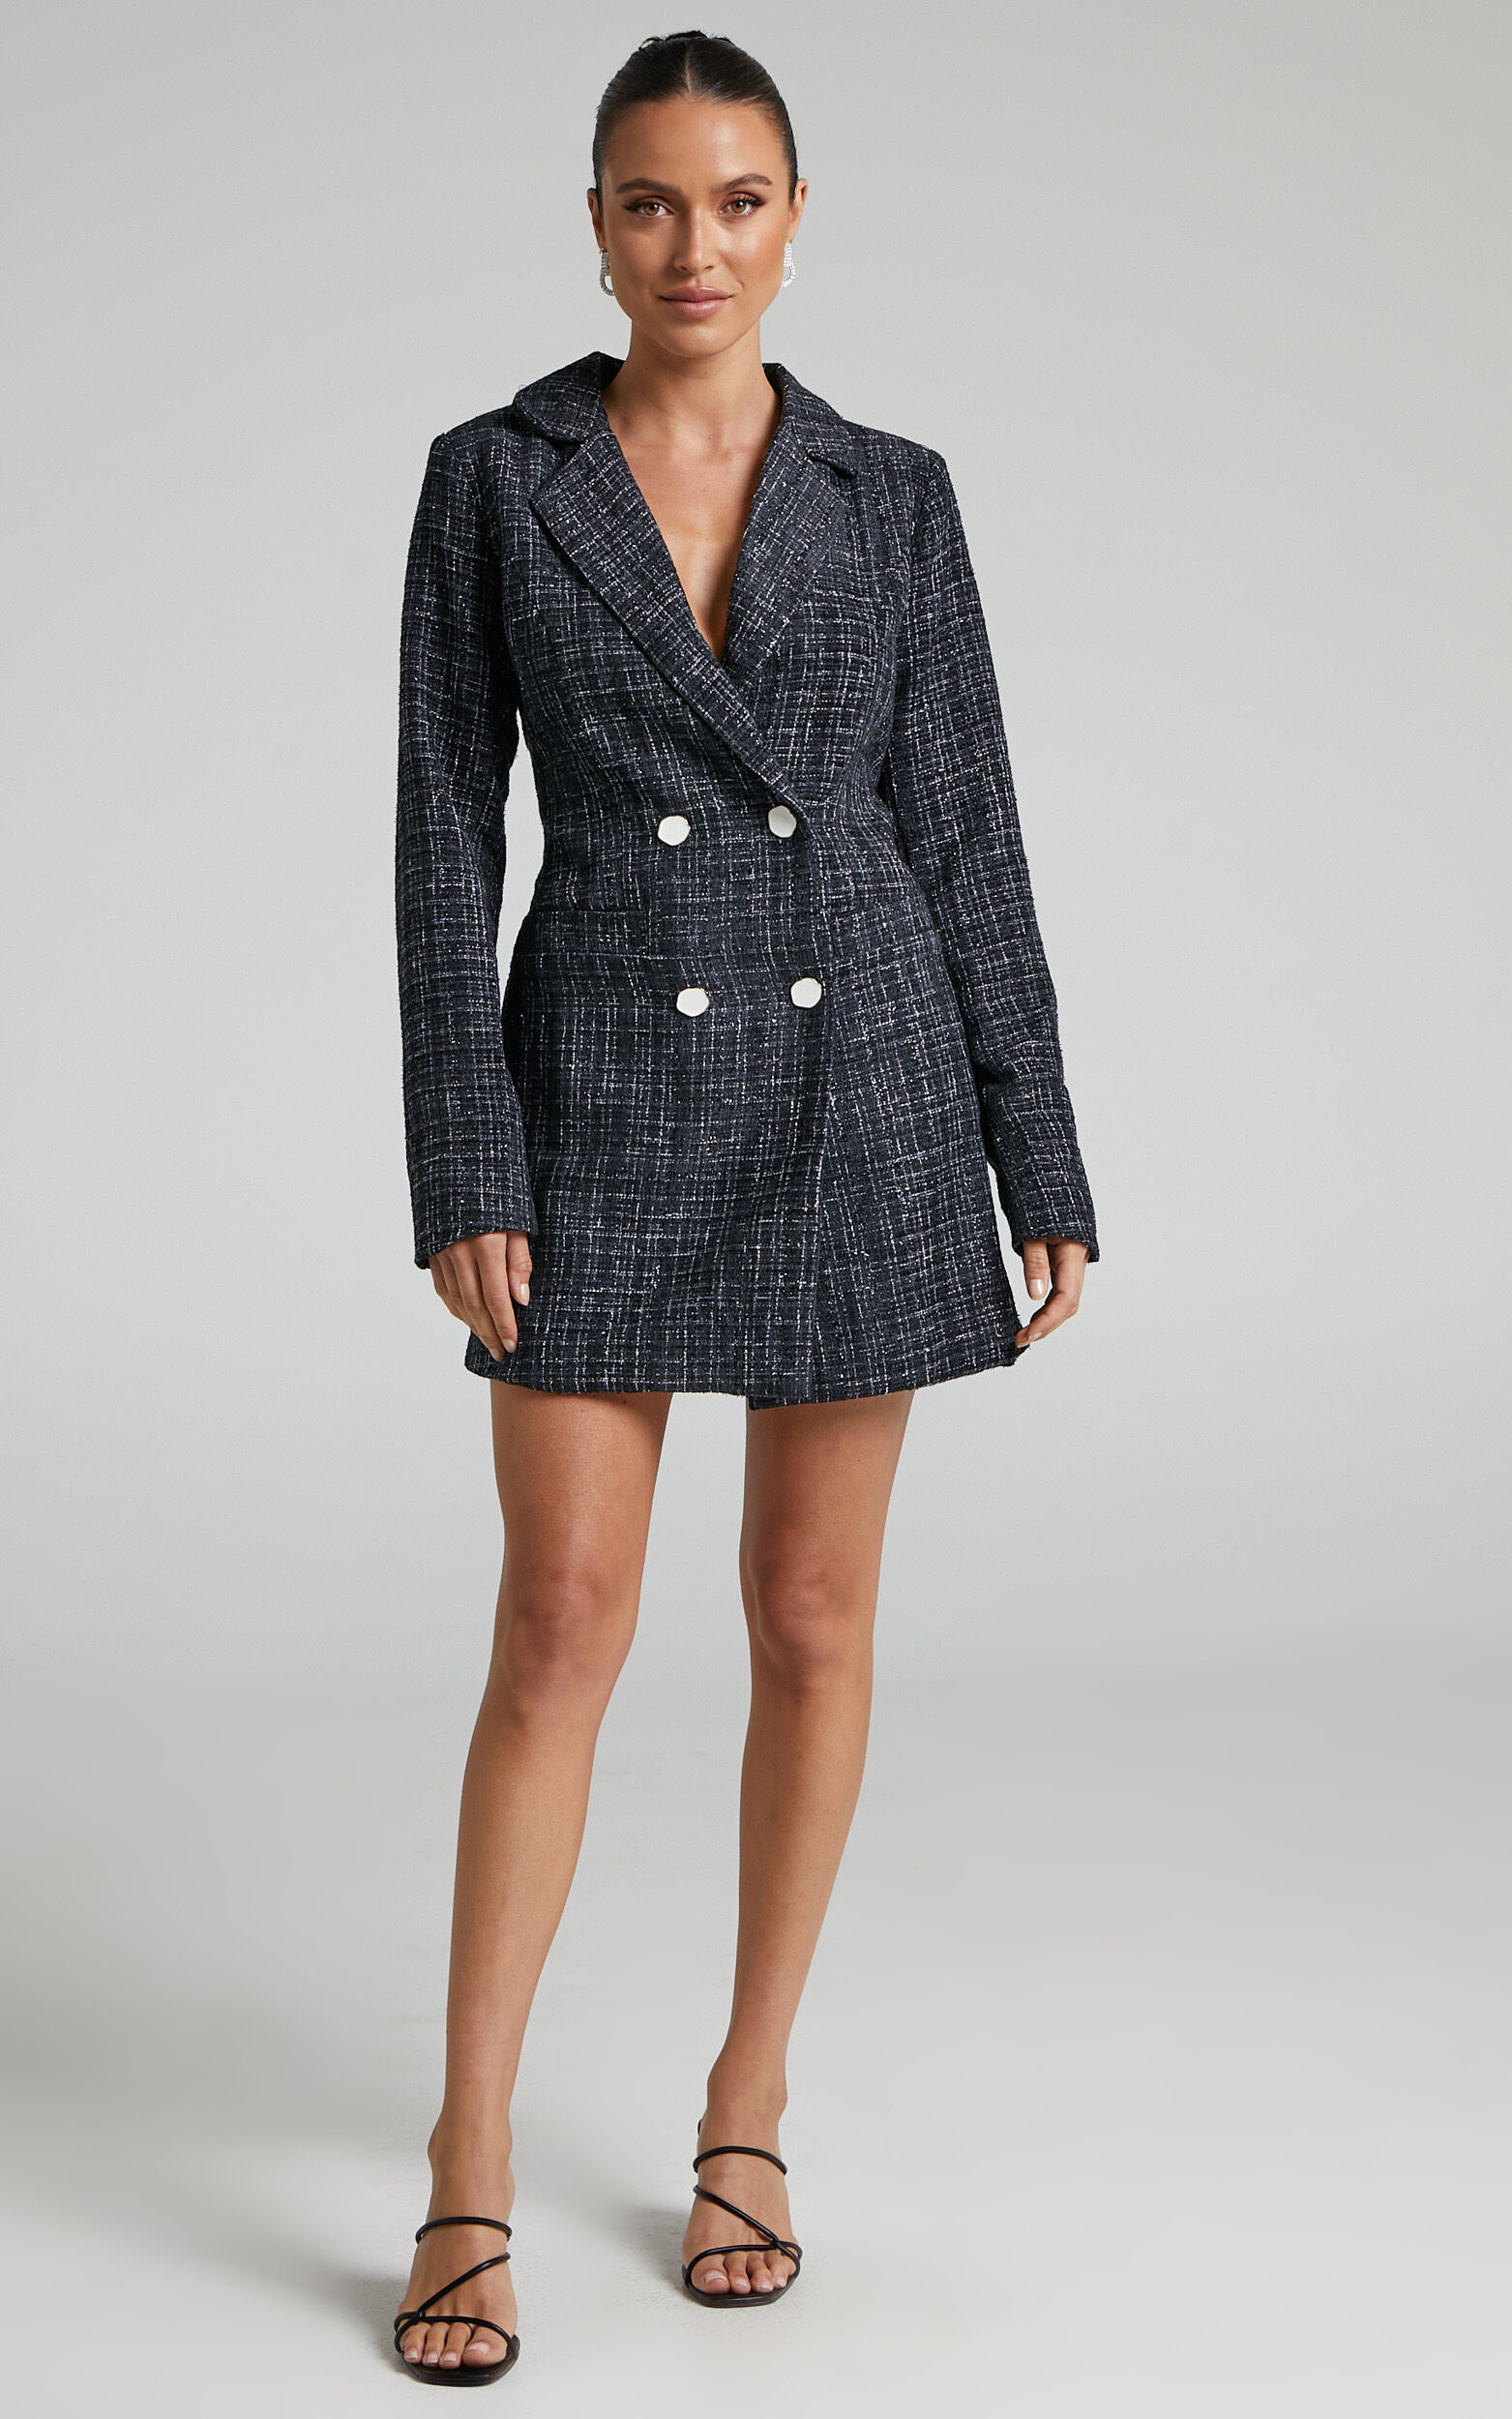 Bjorn Mini Dress - Double Breasted Boucle Tweed Blazer Dress in Black - 04, BLK1, super-hi-res image number null